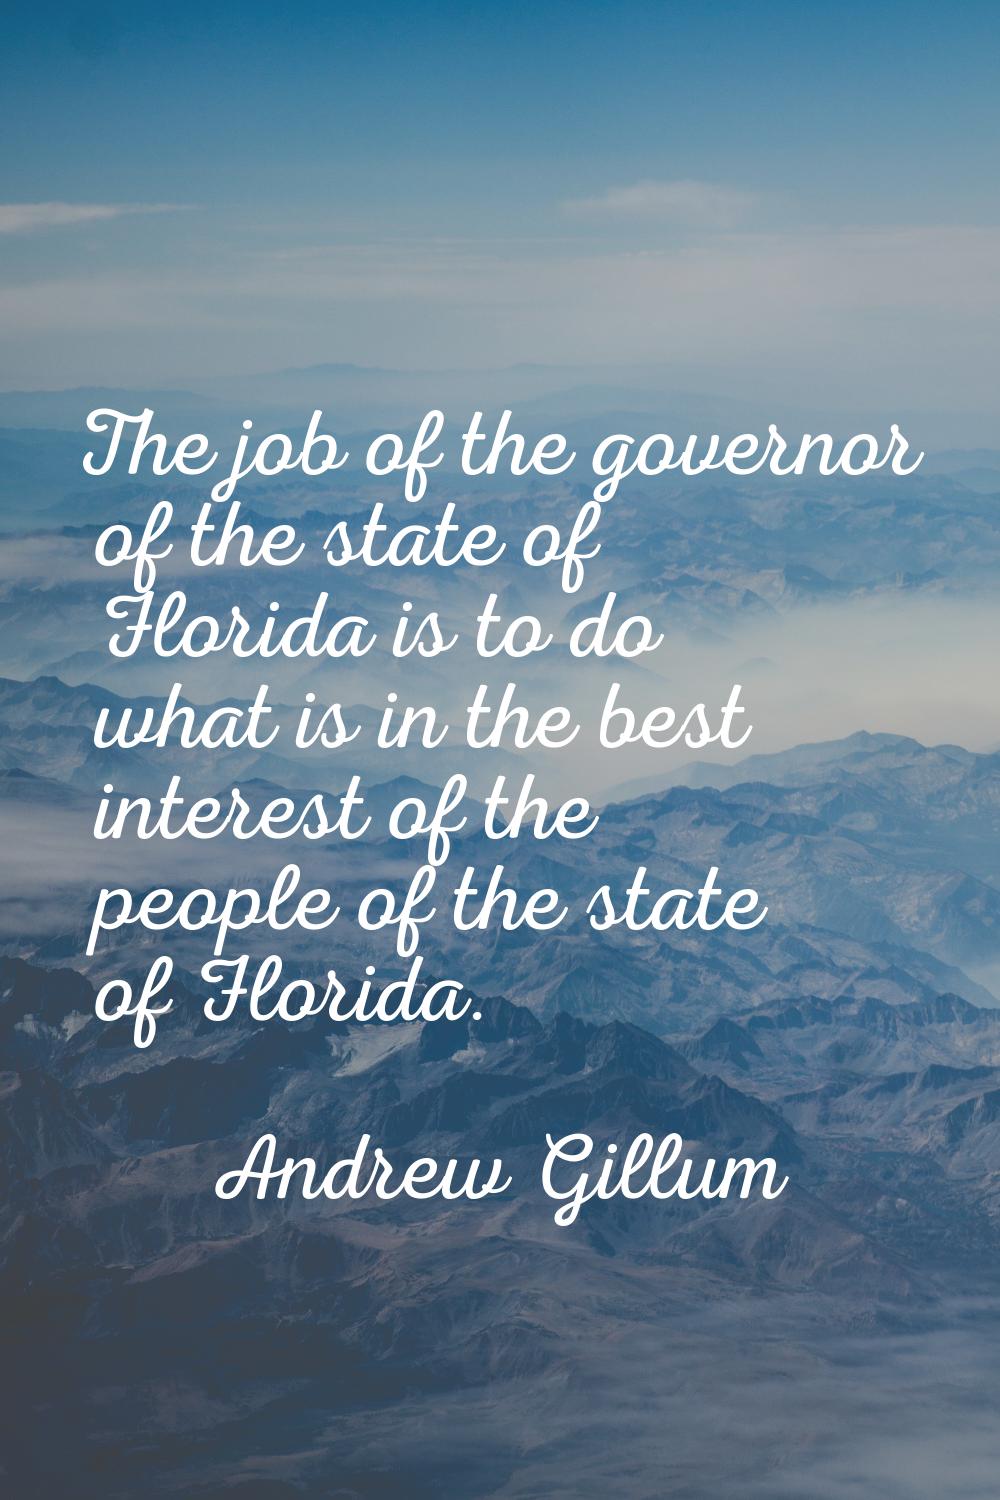 The job of the governor of the state of Florida is to do what is in the best interest of the people